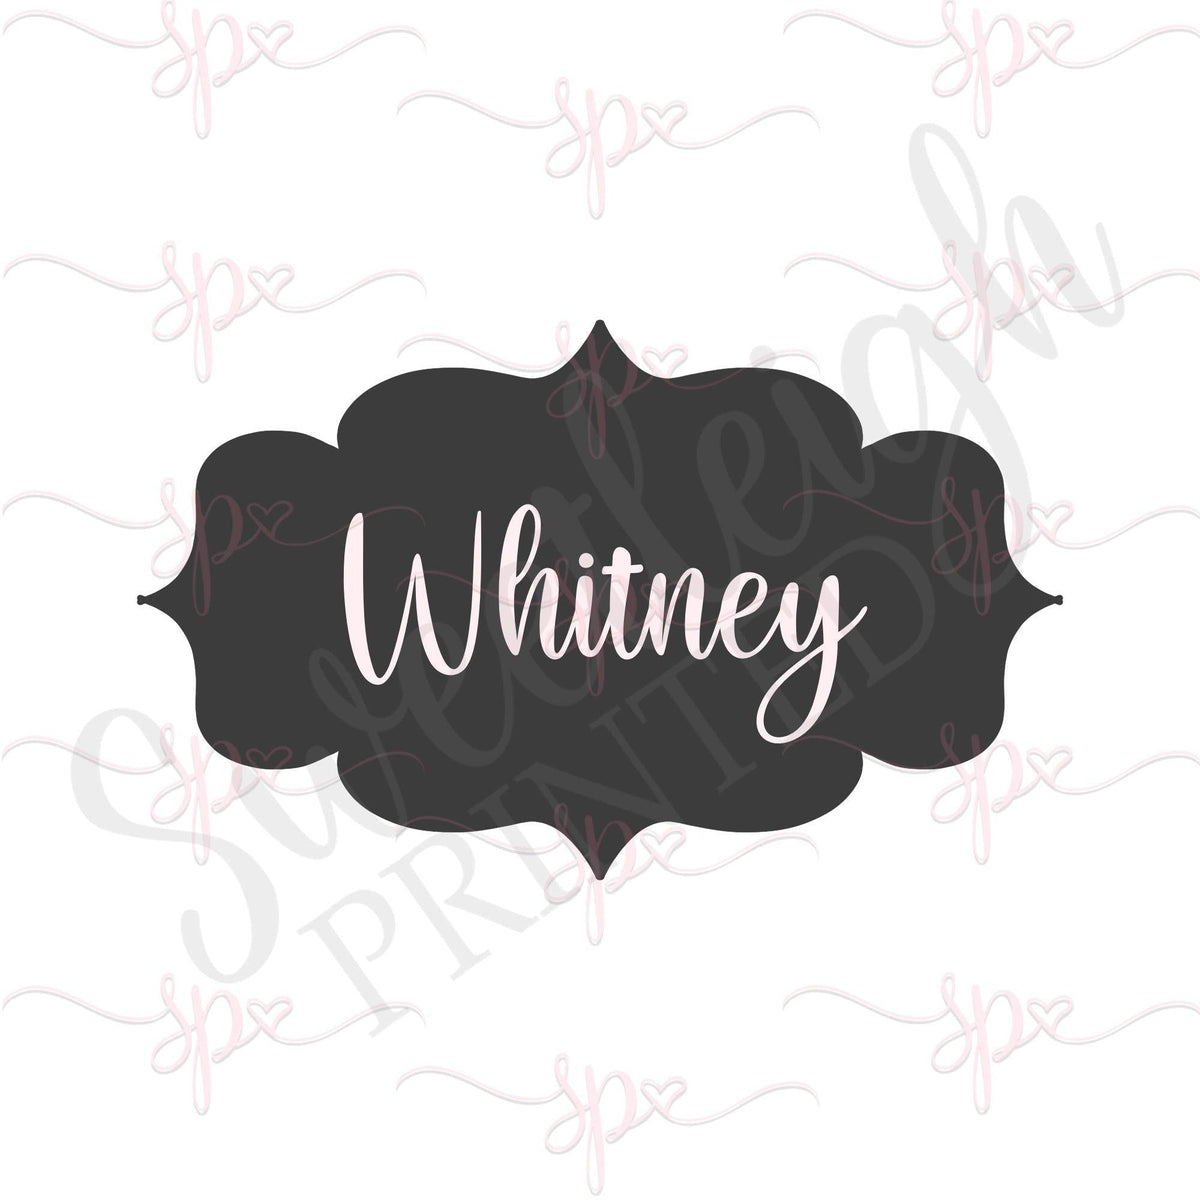 Whitney Plaque Cookie Cutter - Sweetleigh 